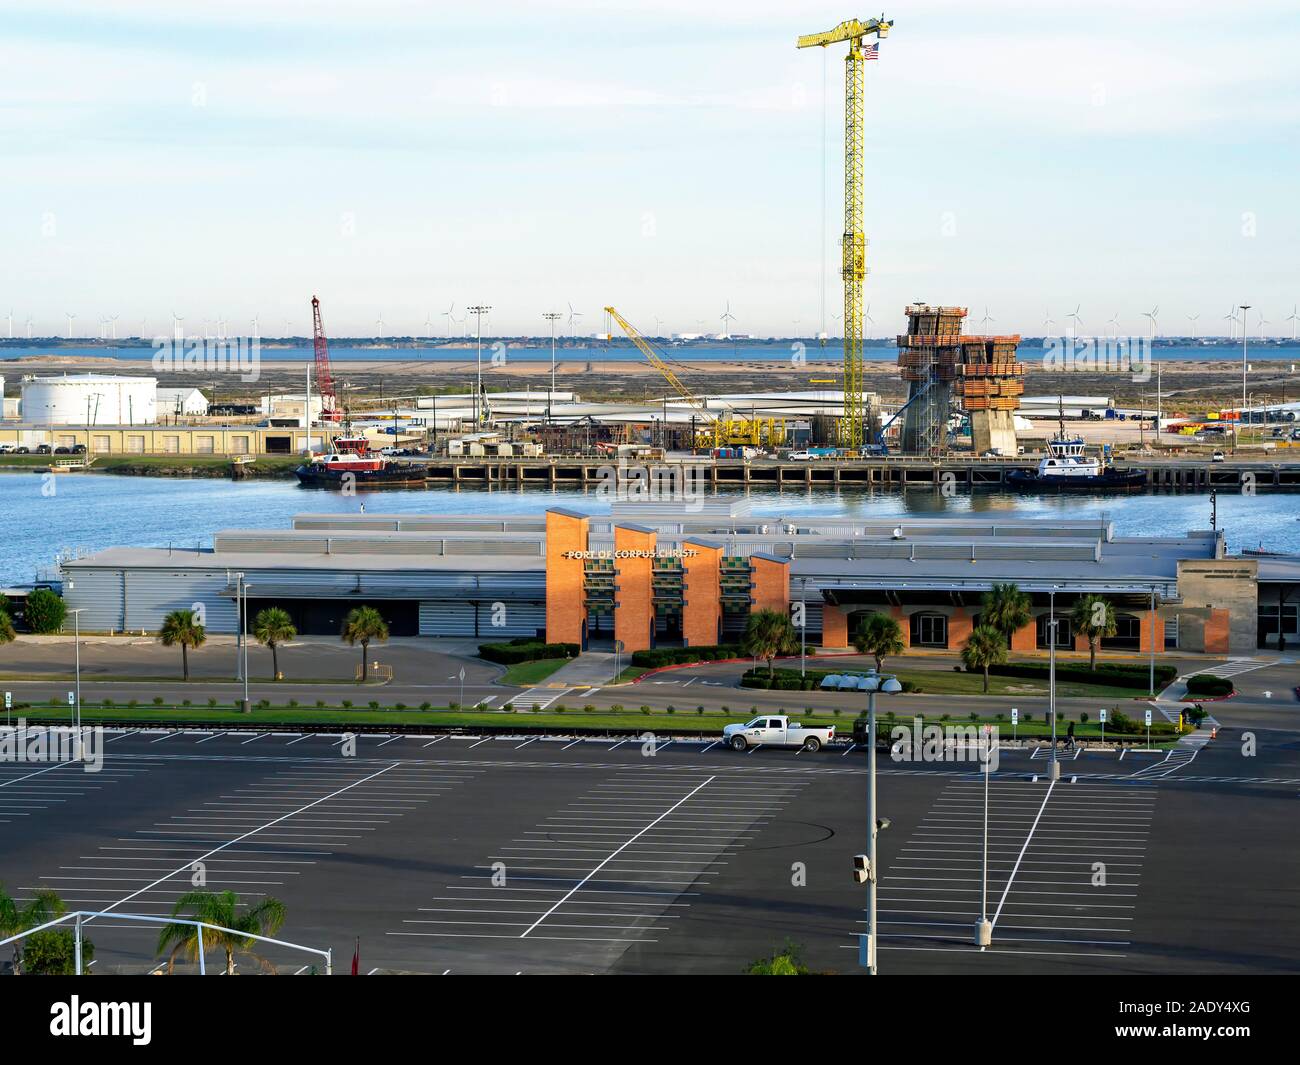 Elevated view of the Port of Corpus Christi, Texas USA with the Congressman Solomon P. Ortiz International Center in the foreground. Stock Photo